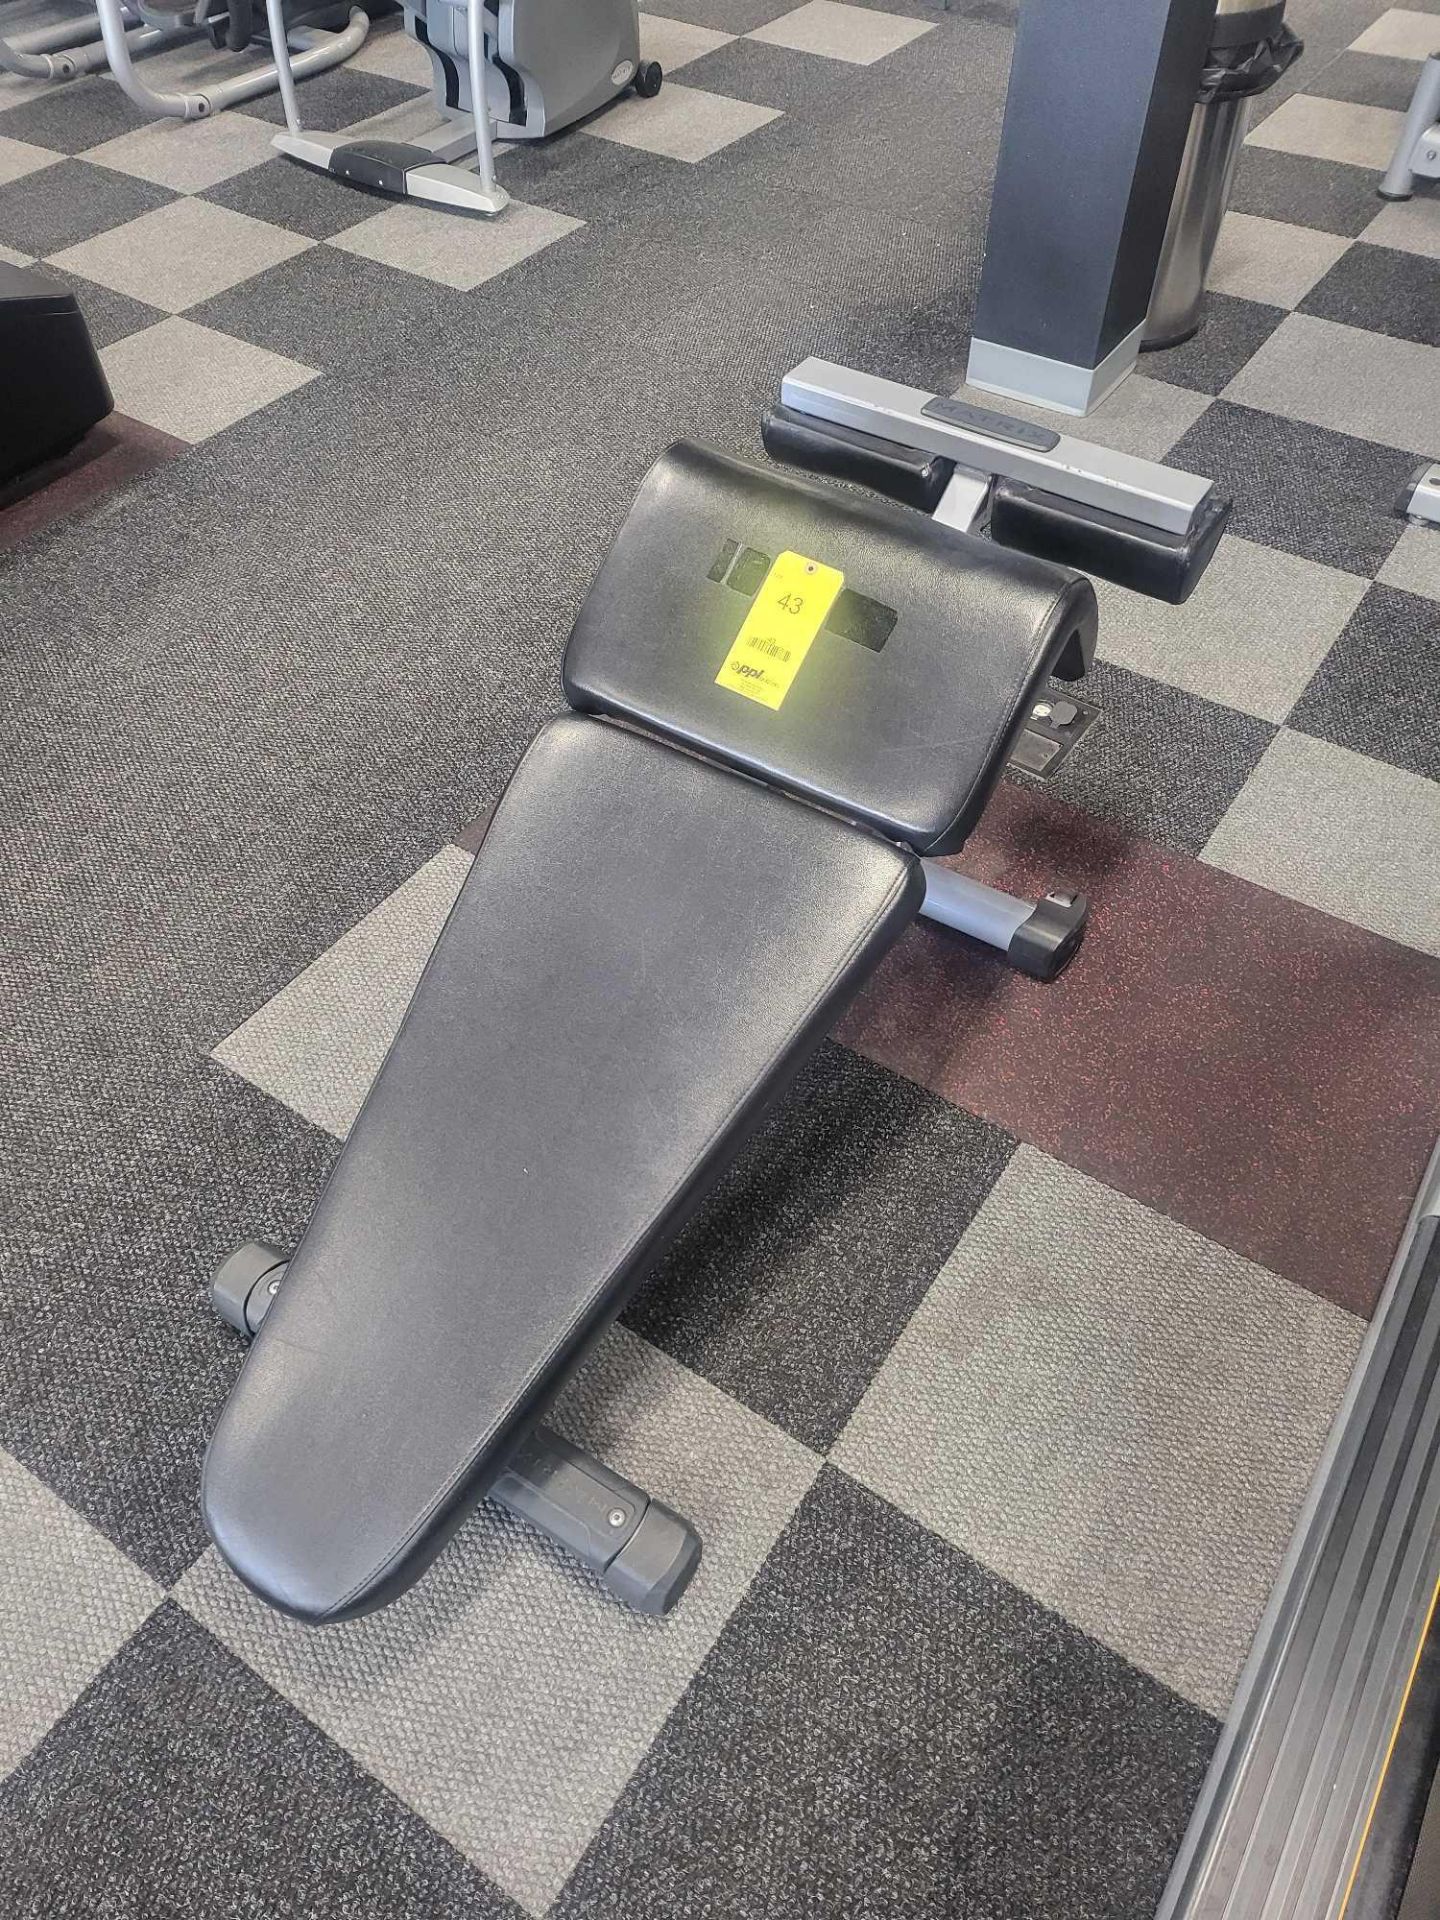 Matrix Model MG-A61-02 Adjustable Decline Bench Max Weight 350 lbs. - Image 3 of 3